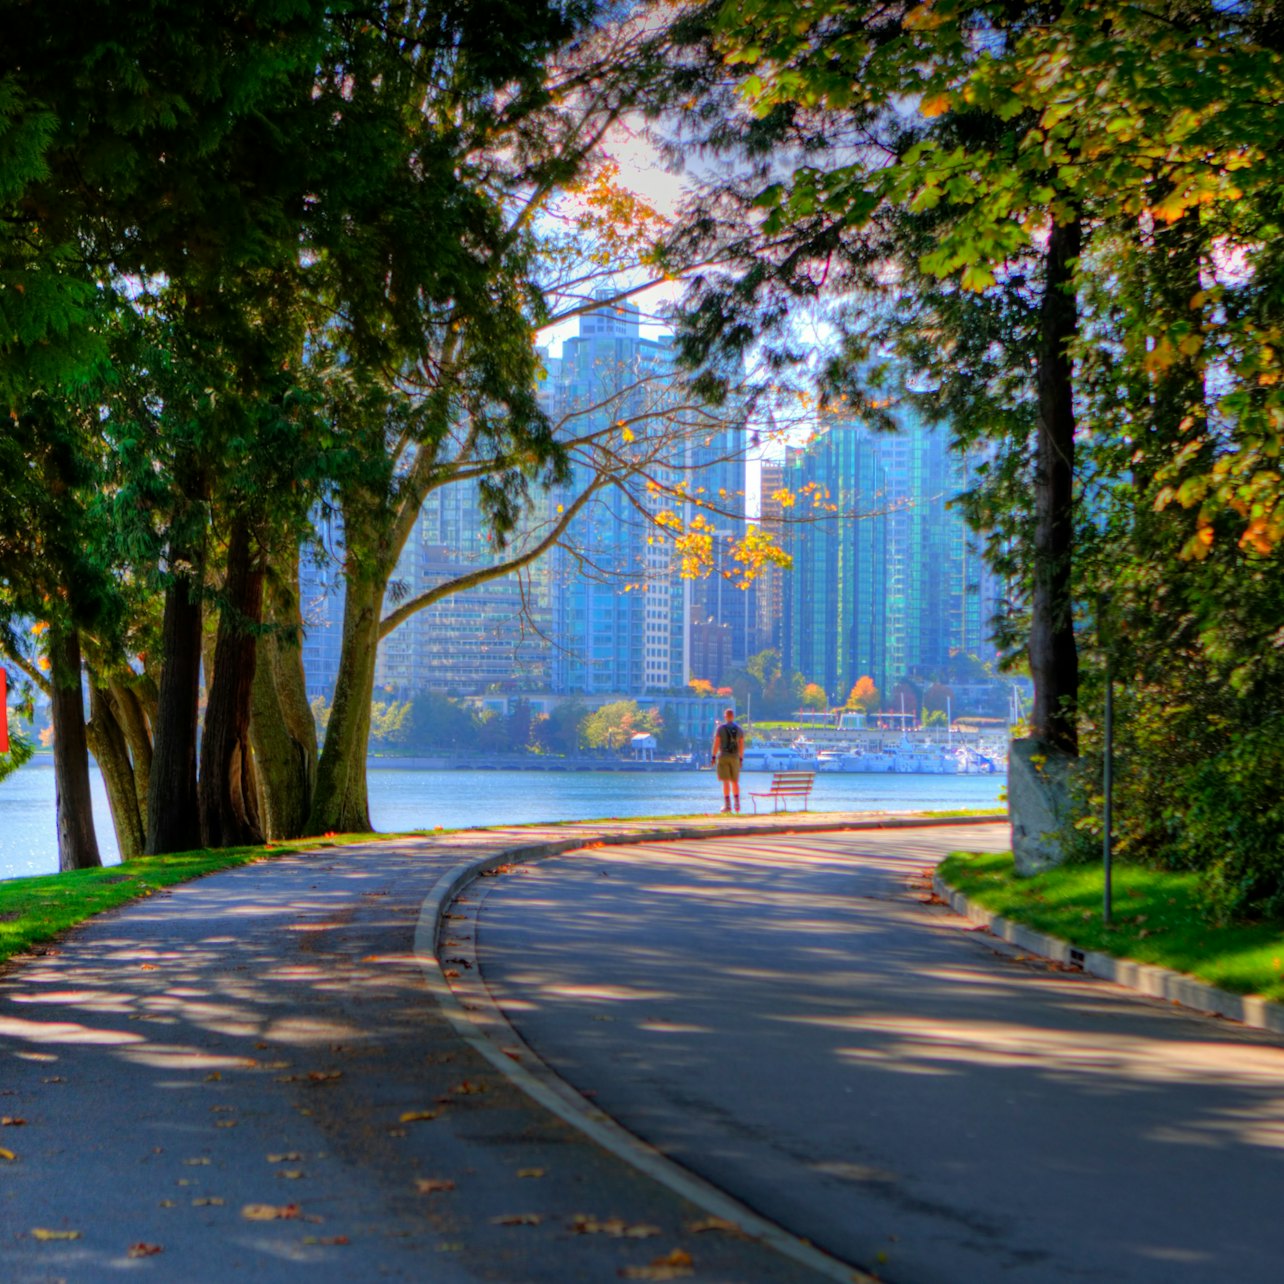 Vancouver Highlights Tour with Vancouver Lookout & Capilano Suspension Bridge - Accommodations in Vancouver